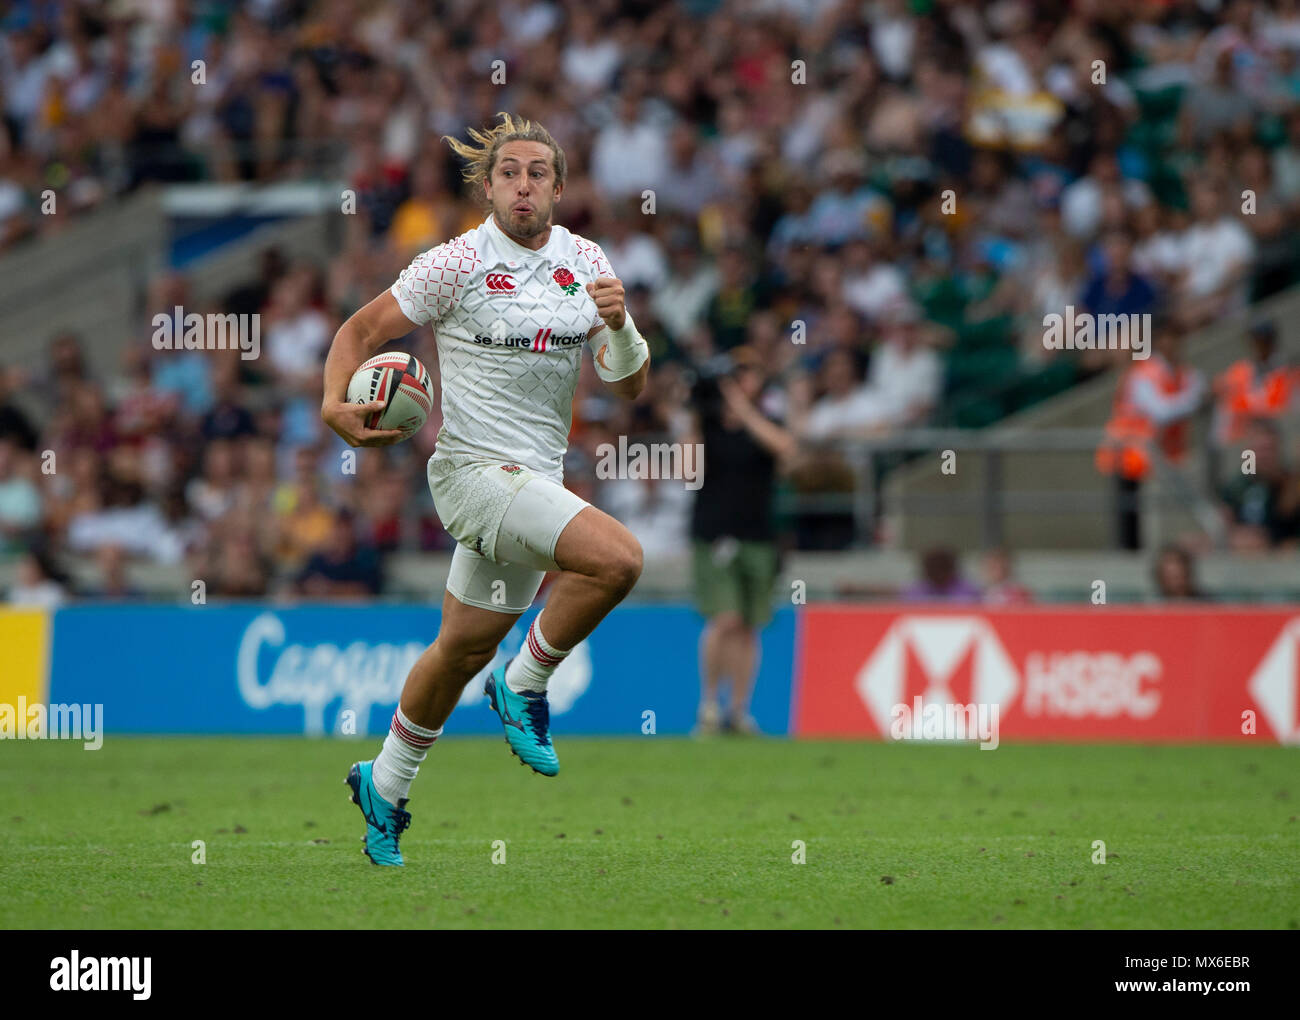 Twickenham, United Kingdom, 3rd June 2018, HSBC London Sevens Series, Game 44 Bronze Medal Game, Ireland vs England,   Englands, Dan BIBBY, strides in, to, score a try, during the Rugby 7's, match, played at the RFU Stadium, Twickenham, England,   © Peter SPURRIER/Alamy Live News Stock Photo